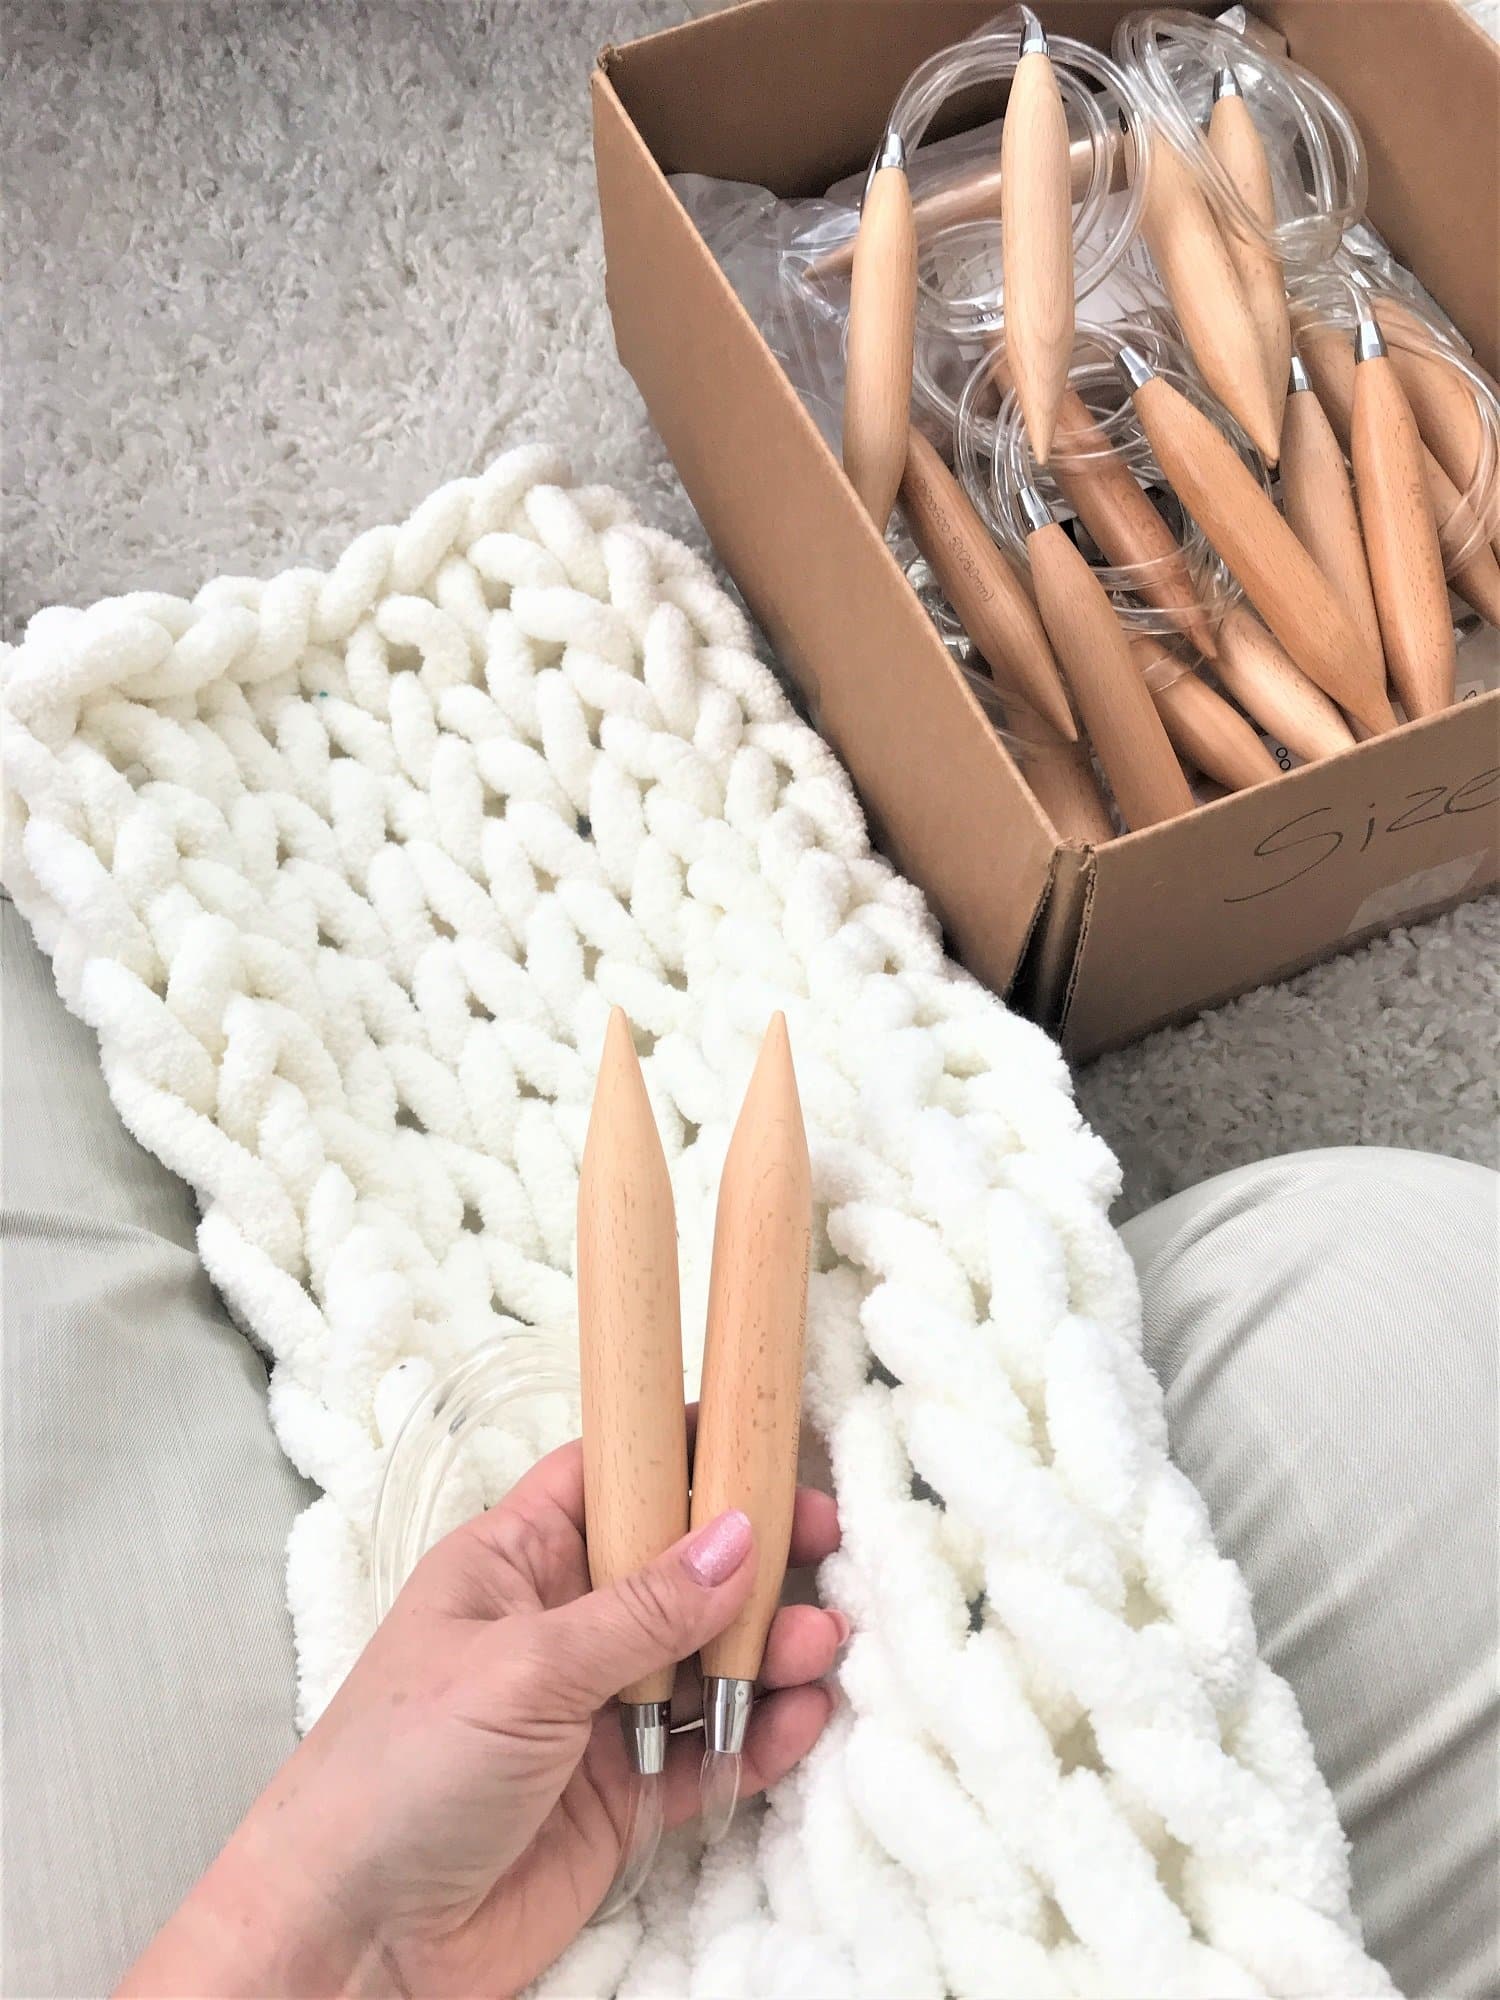 Arm Knitting - Everything You've Ever Wanted to Know